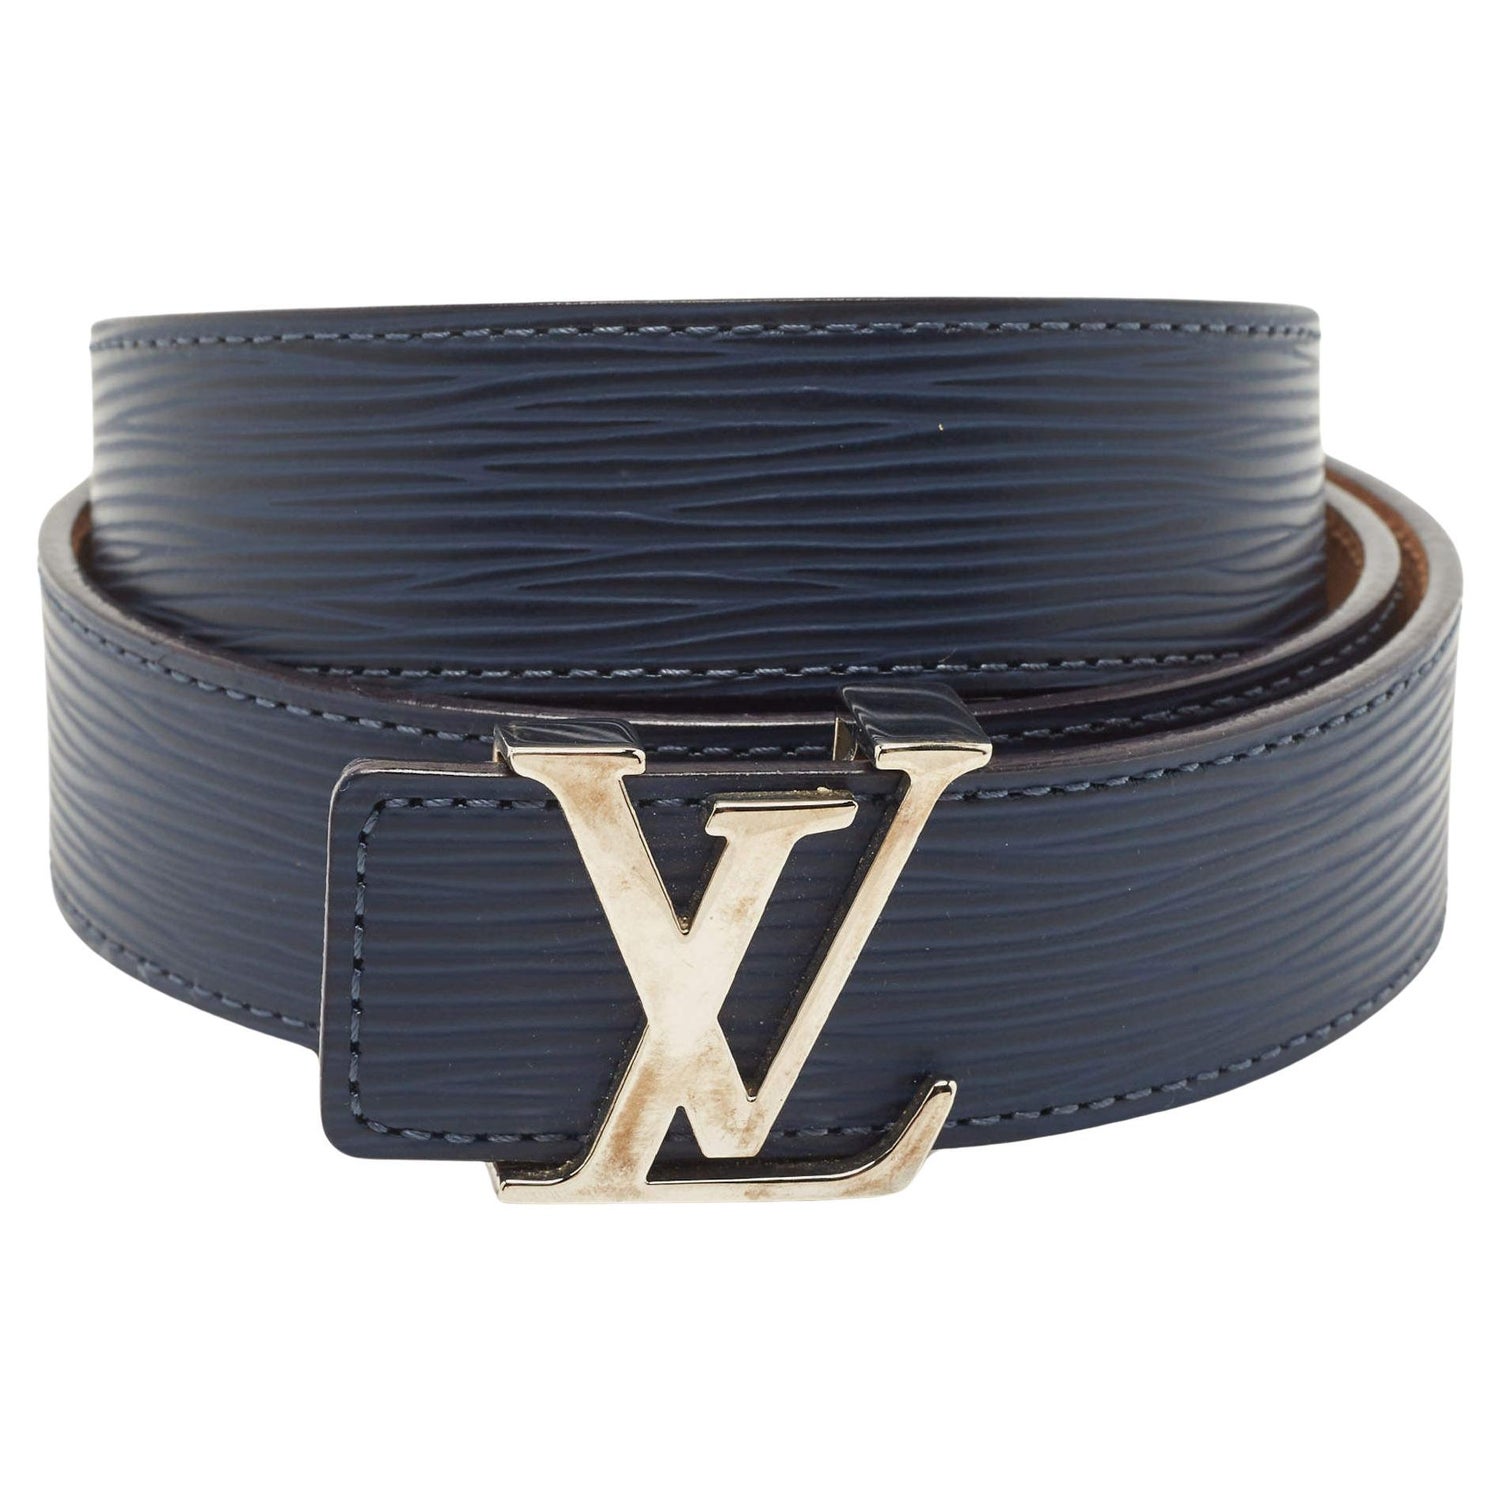 Found these Lv belts both are 17 a piece, seems legit but before i